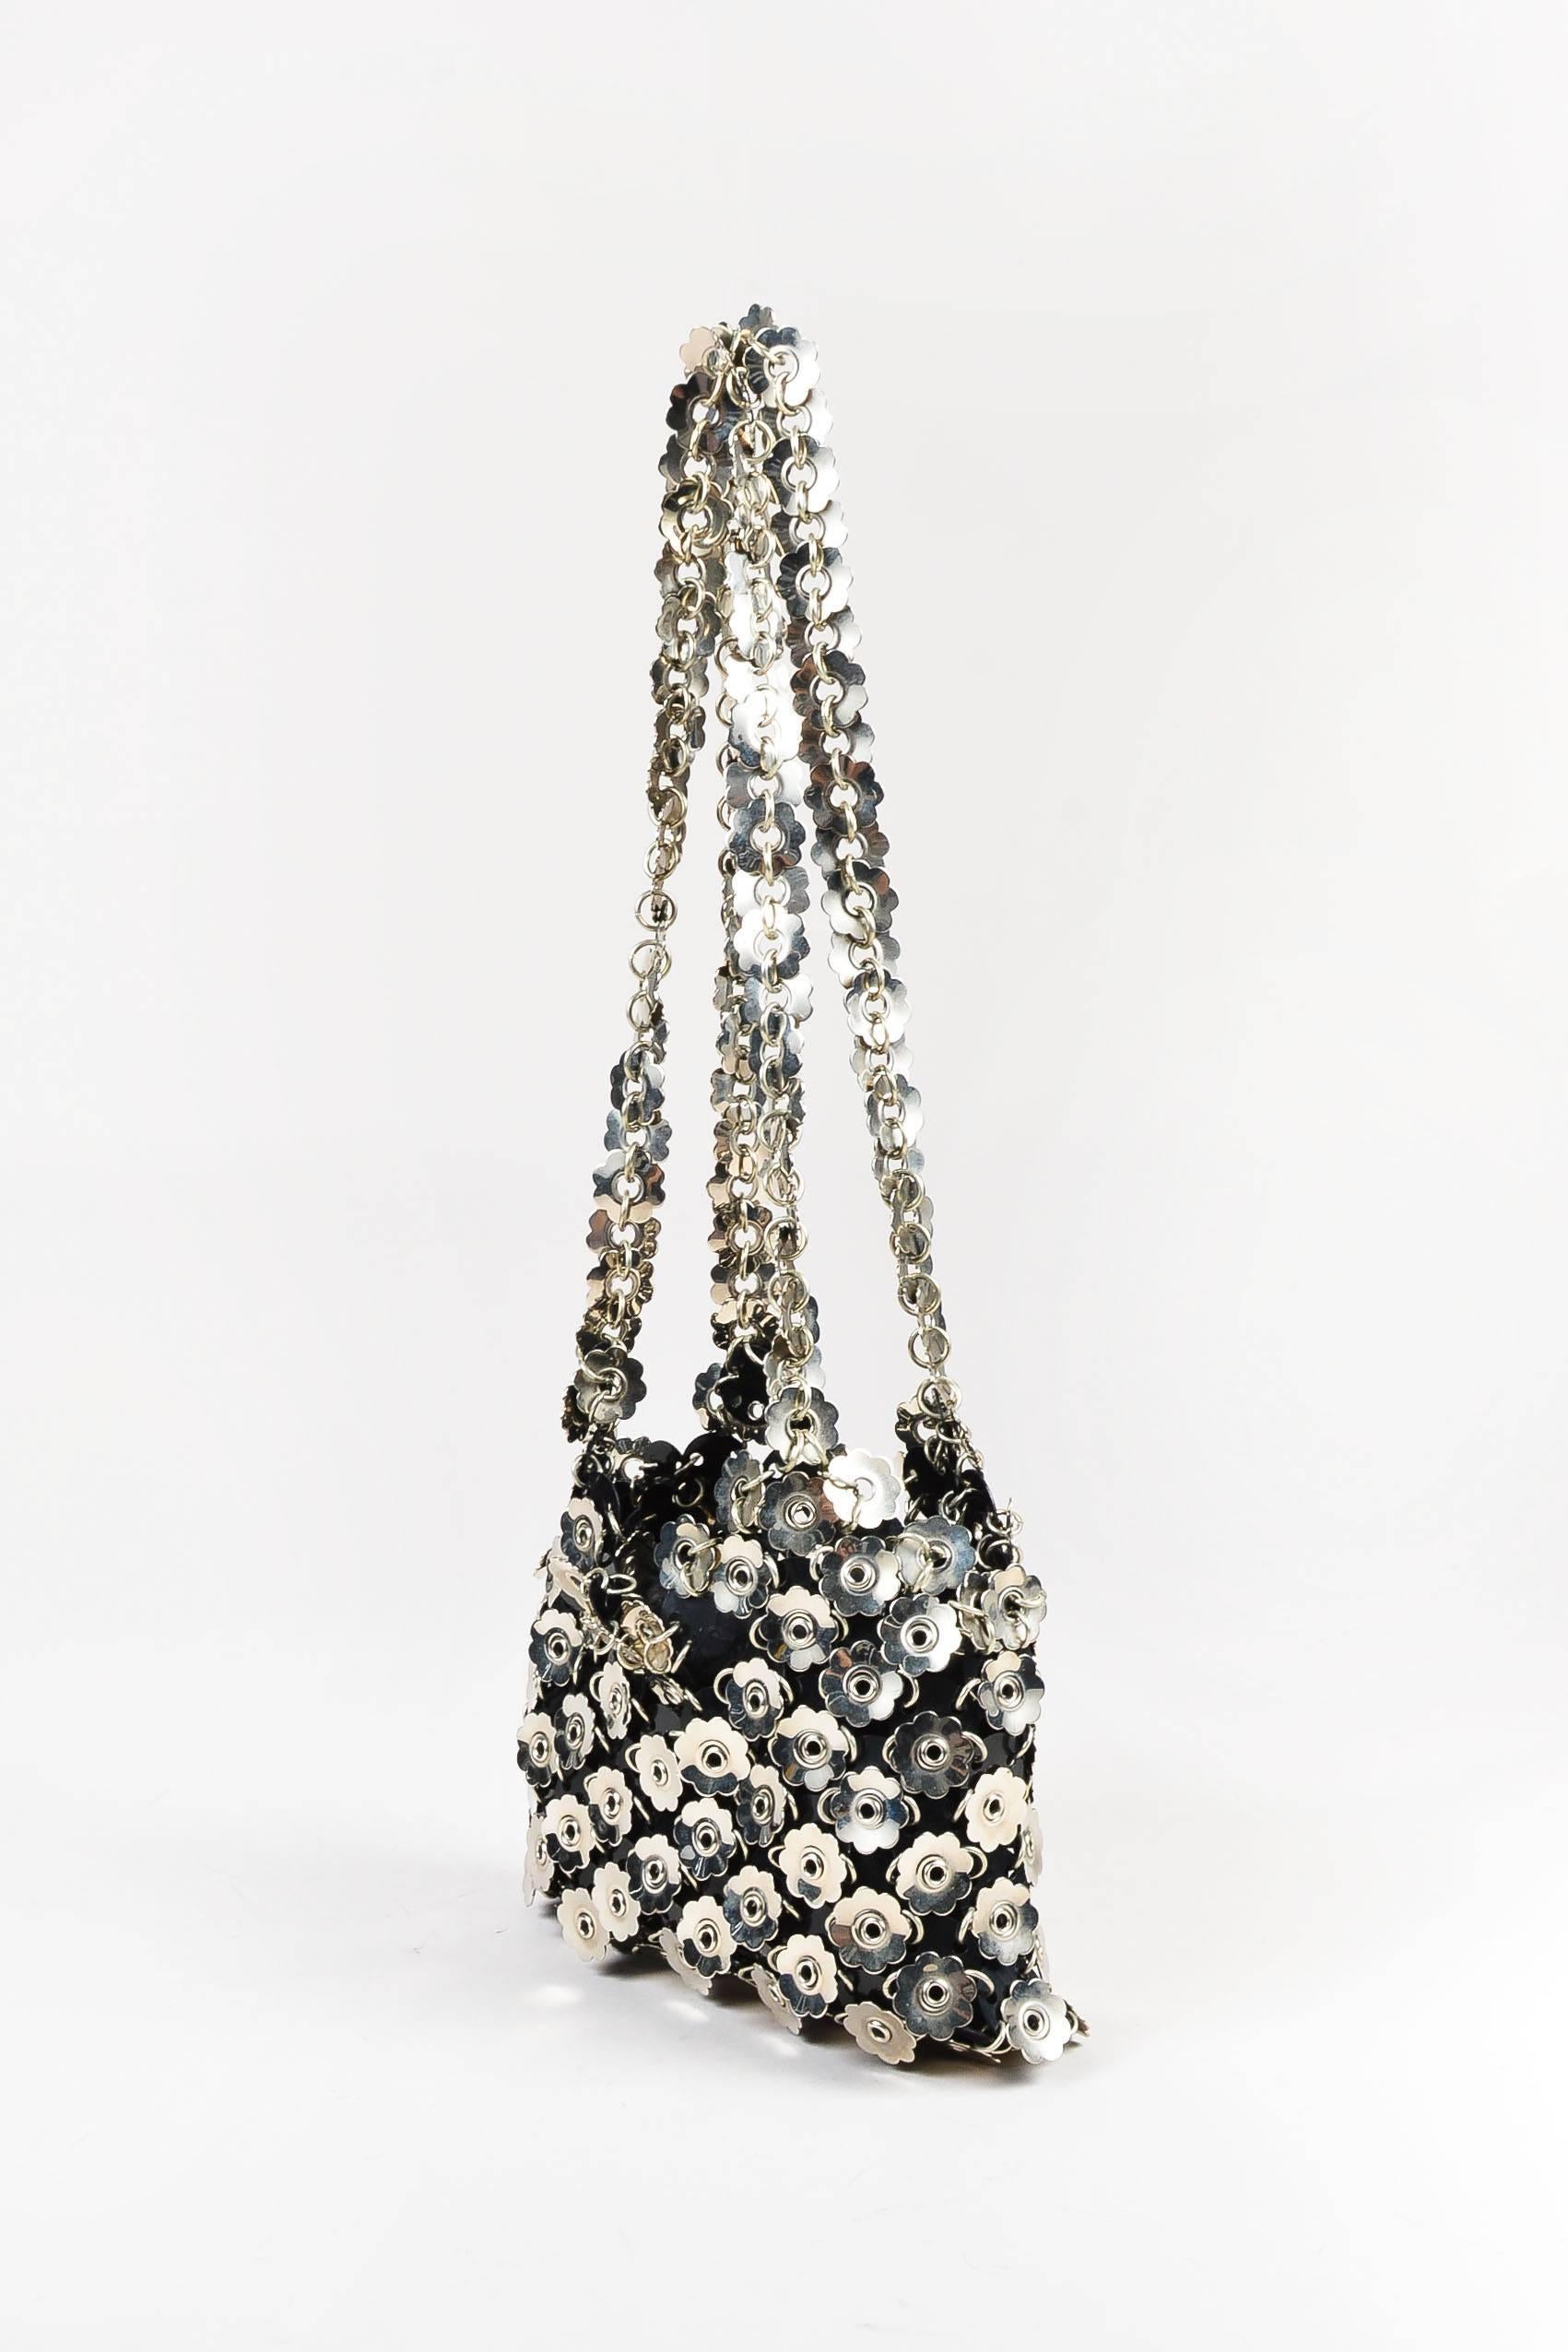 Vintage shoulder bag from Paco Rabanne features silver-tone flower metal and black circular plastic embellishemtns. Two straps for wear. Top zipper for closure. Lined.

Interior features: Lining

Additional measurements: Strap Length